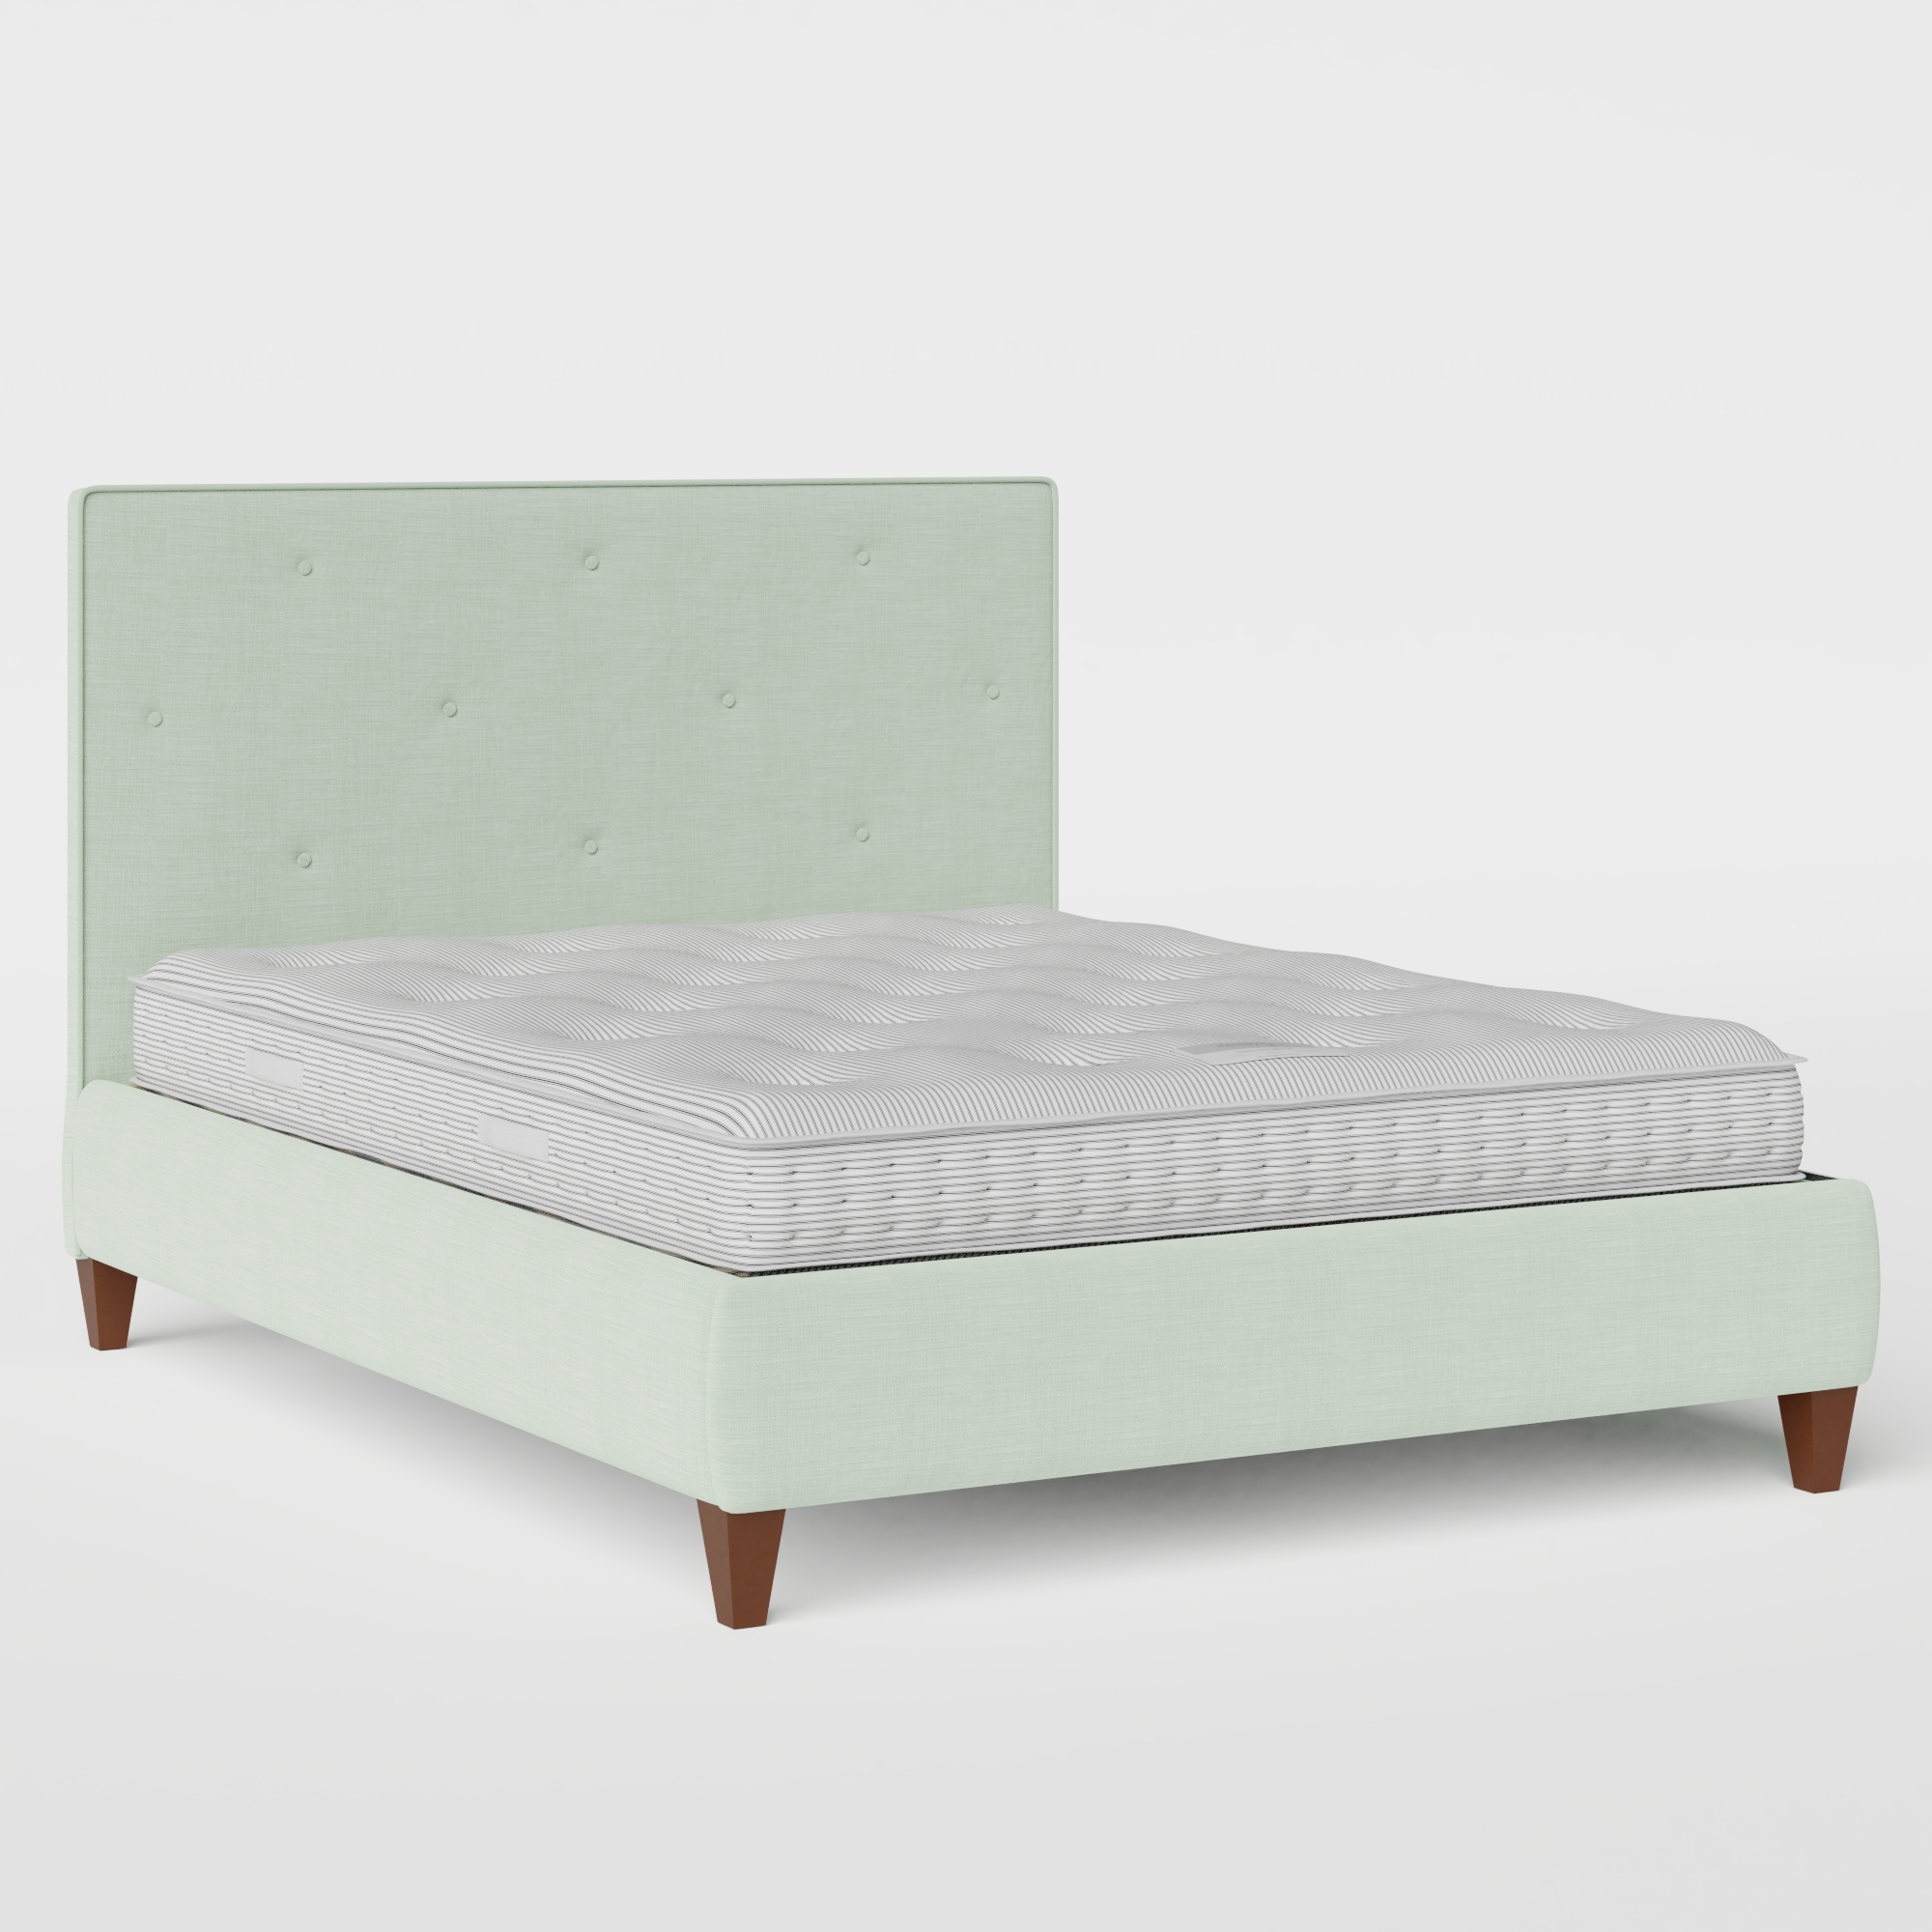 Yushan Buttoned Diagonal upholstered bed in duckegg fabric